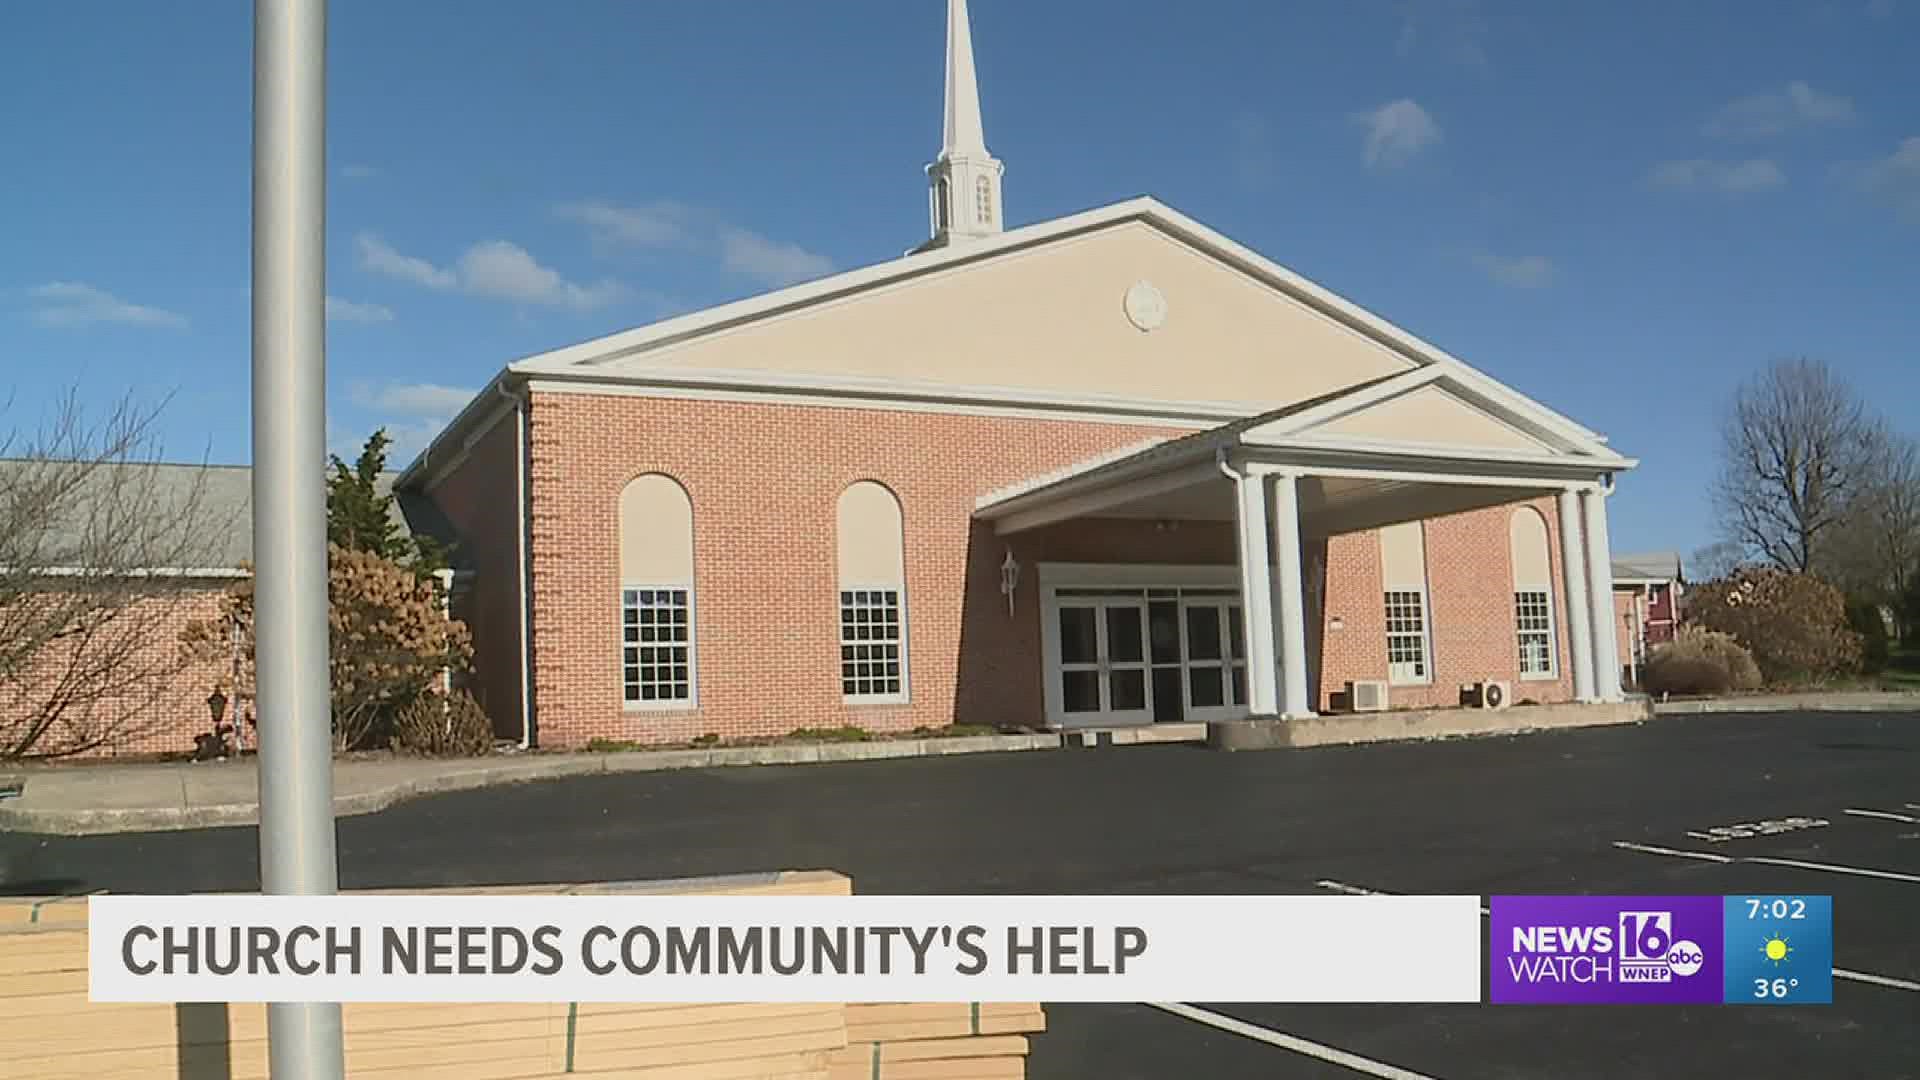 The Greenview Alliance Church near Montoursville needs $300,000 worth of repairs to its roof.